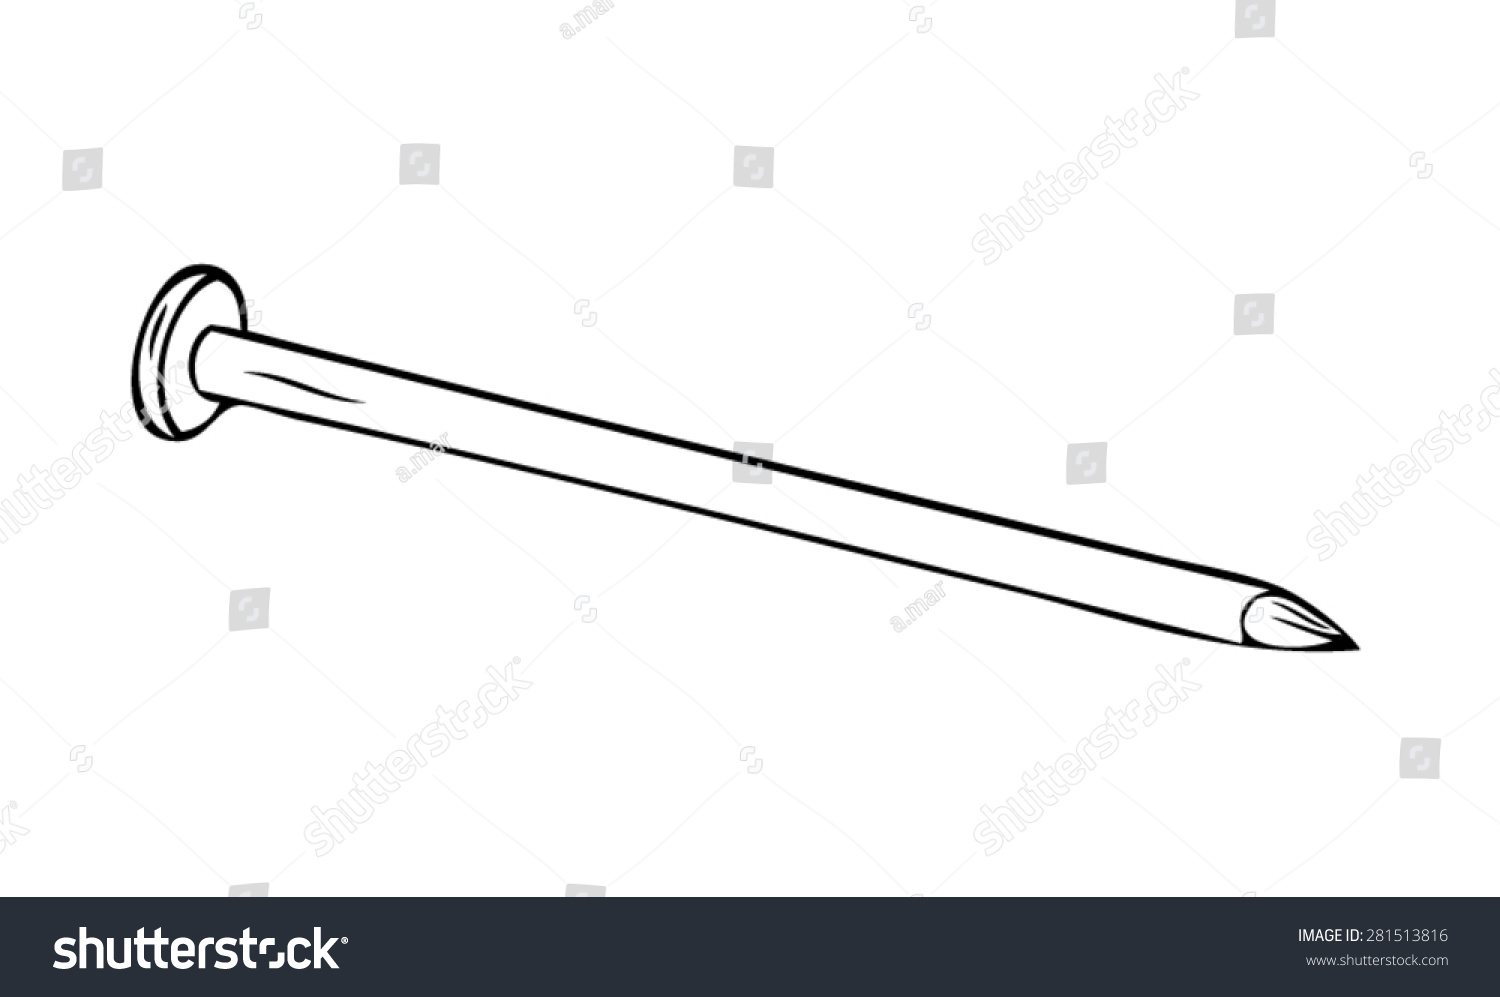 Nail - Drawn Outline Vector - 281513816 : Shutterstock